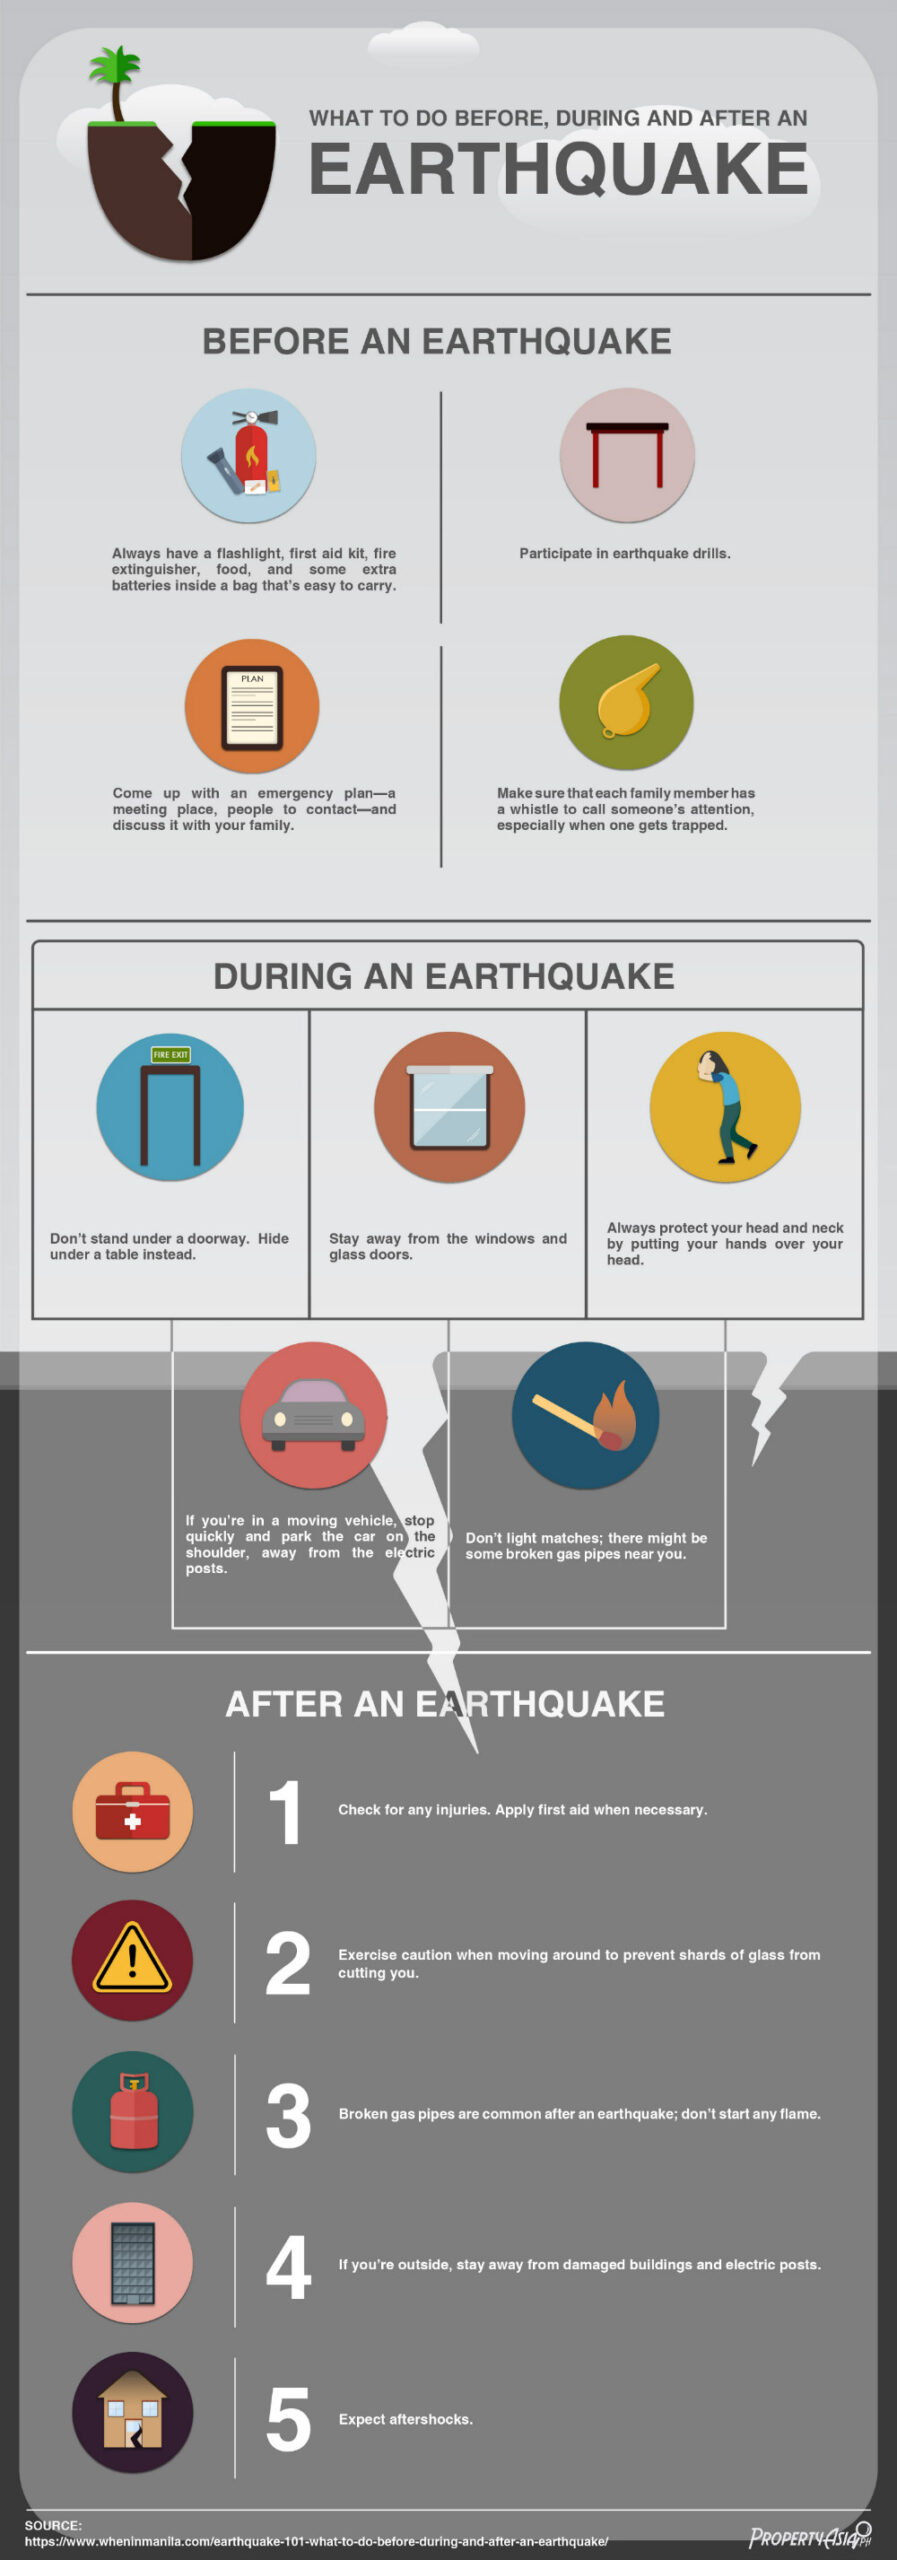 How to Prepare for an Earthquake | California Academy of Sciences